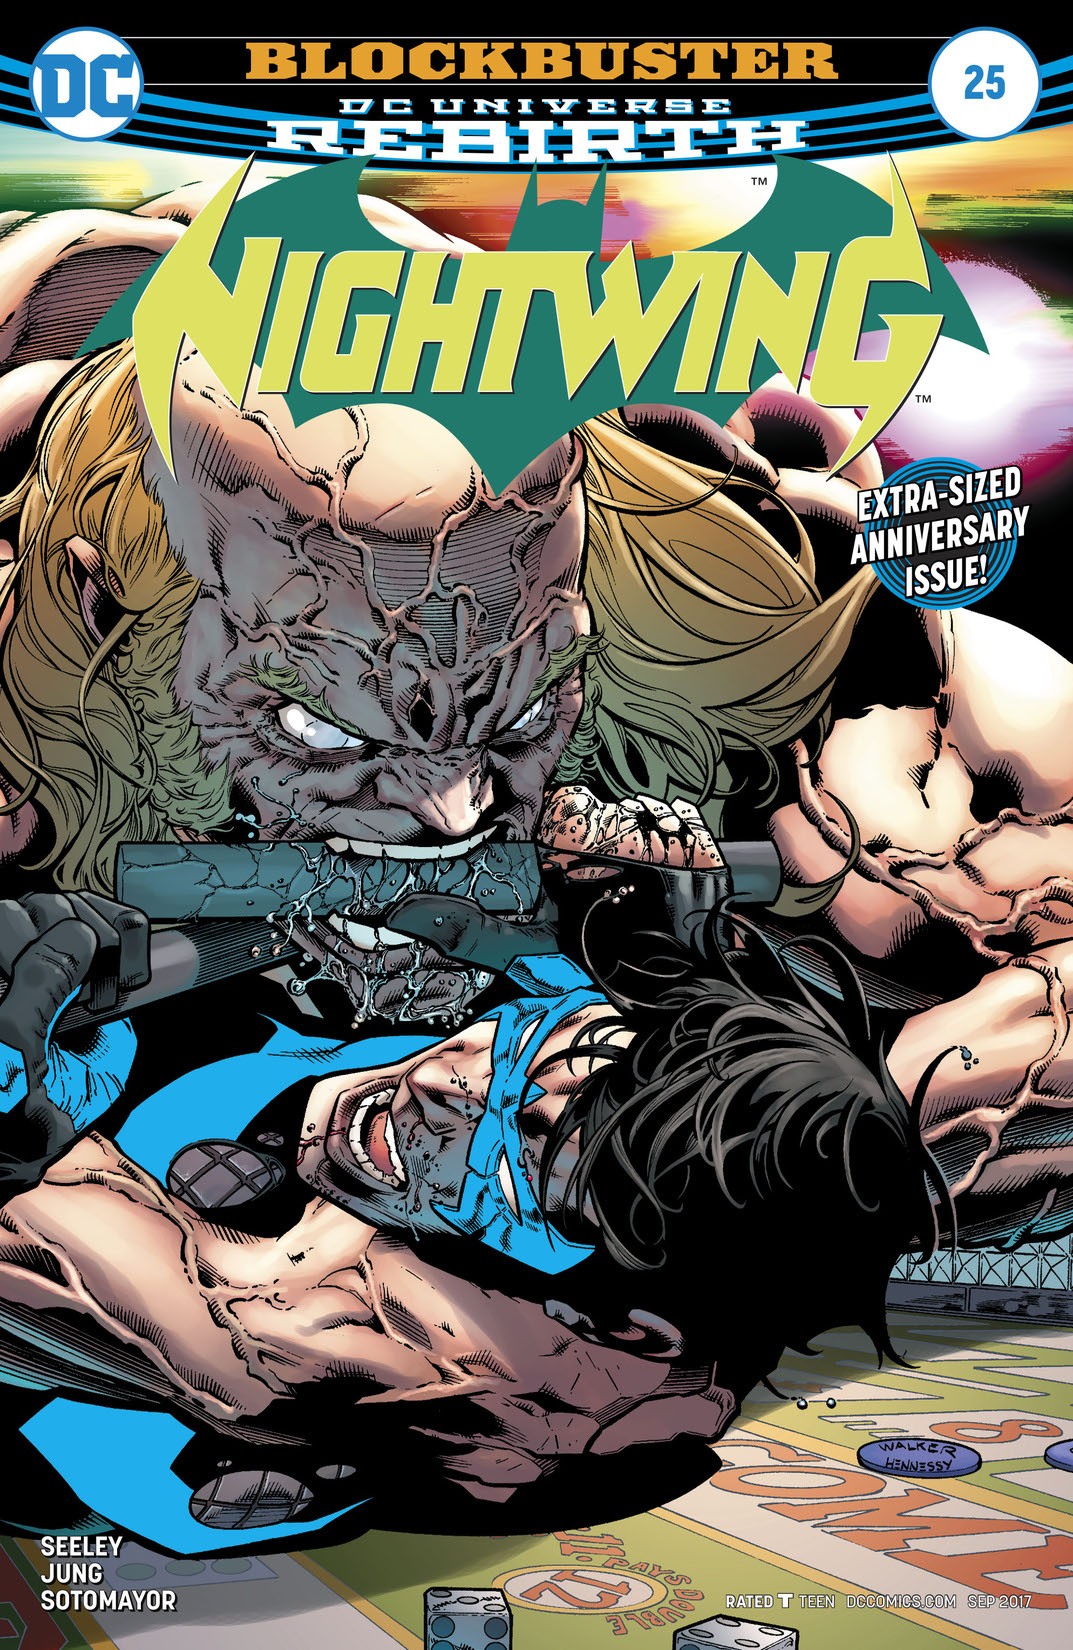 Nightwing (2016-) #25 preview images